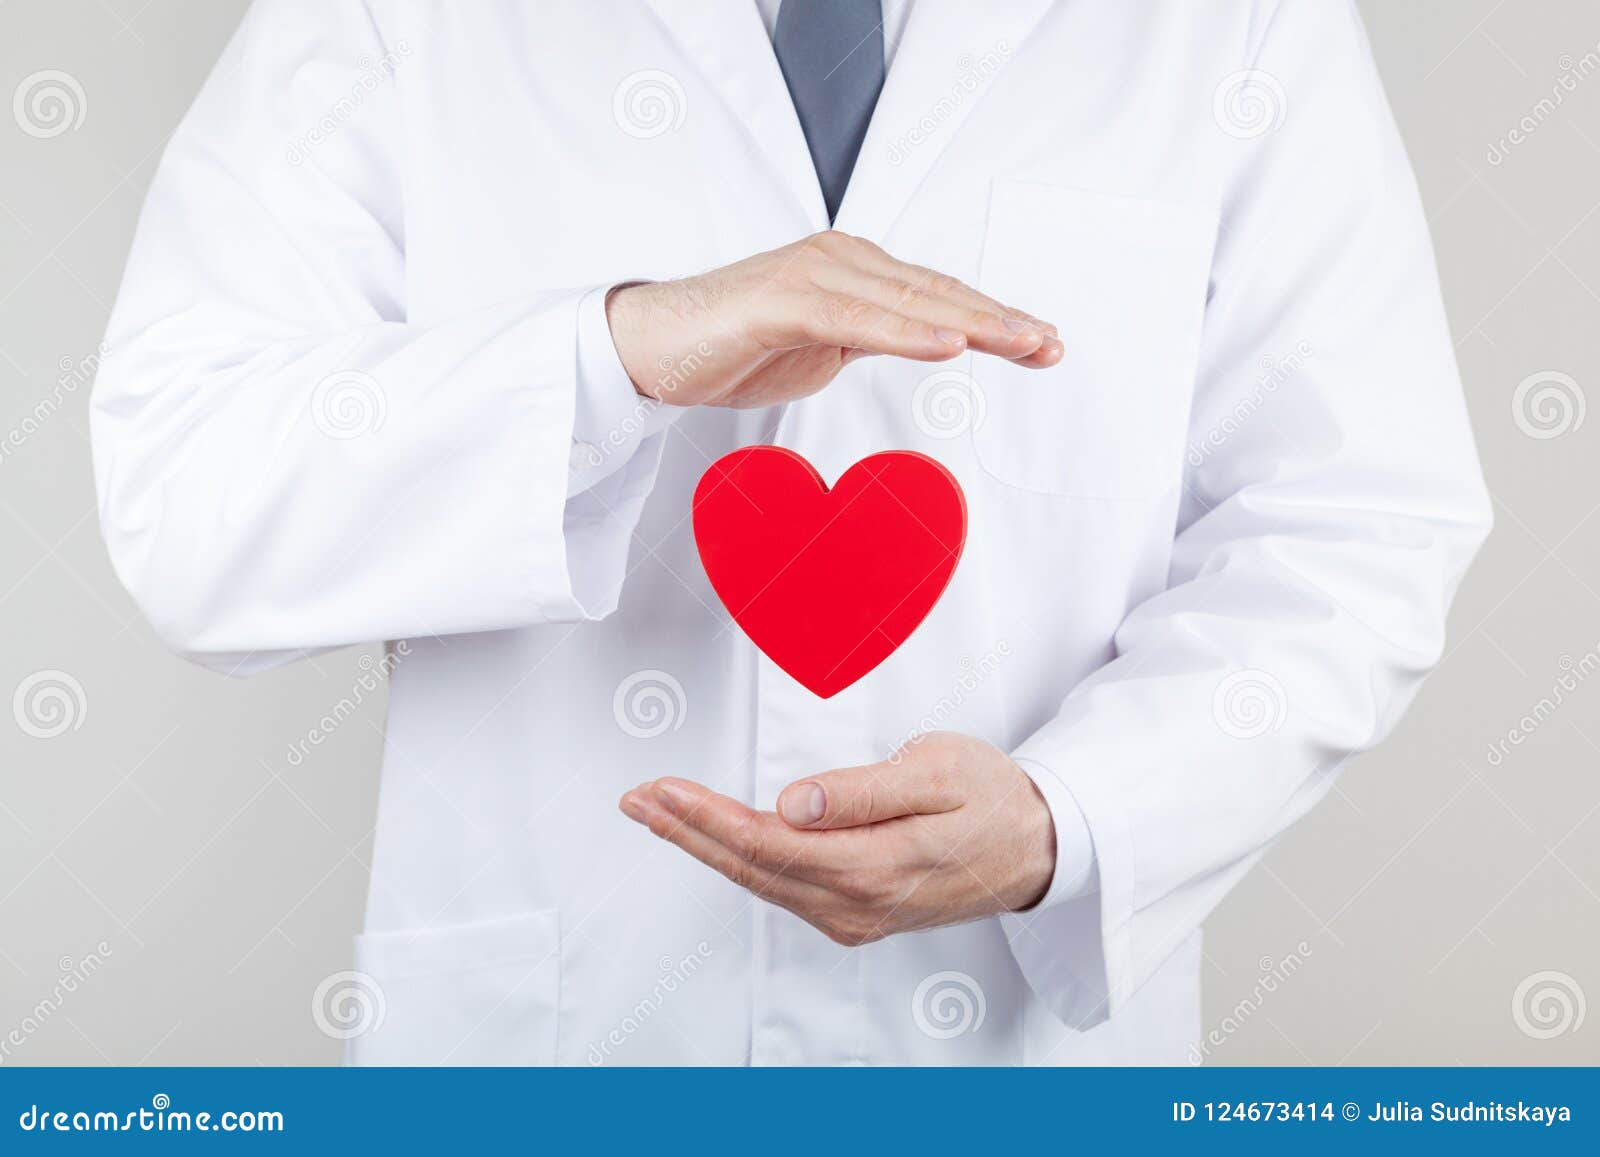 doctor cardiologist hands with flying heart. cardiology and heart disease concept.